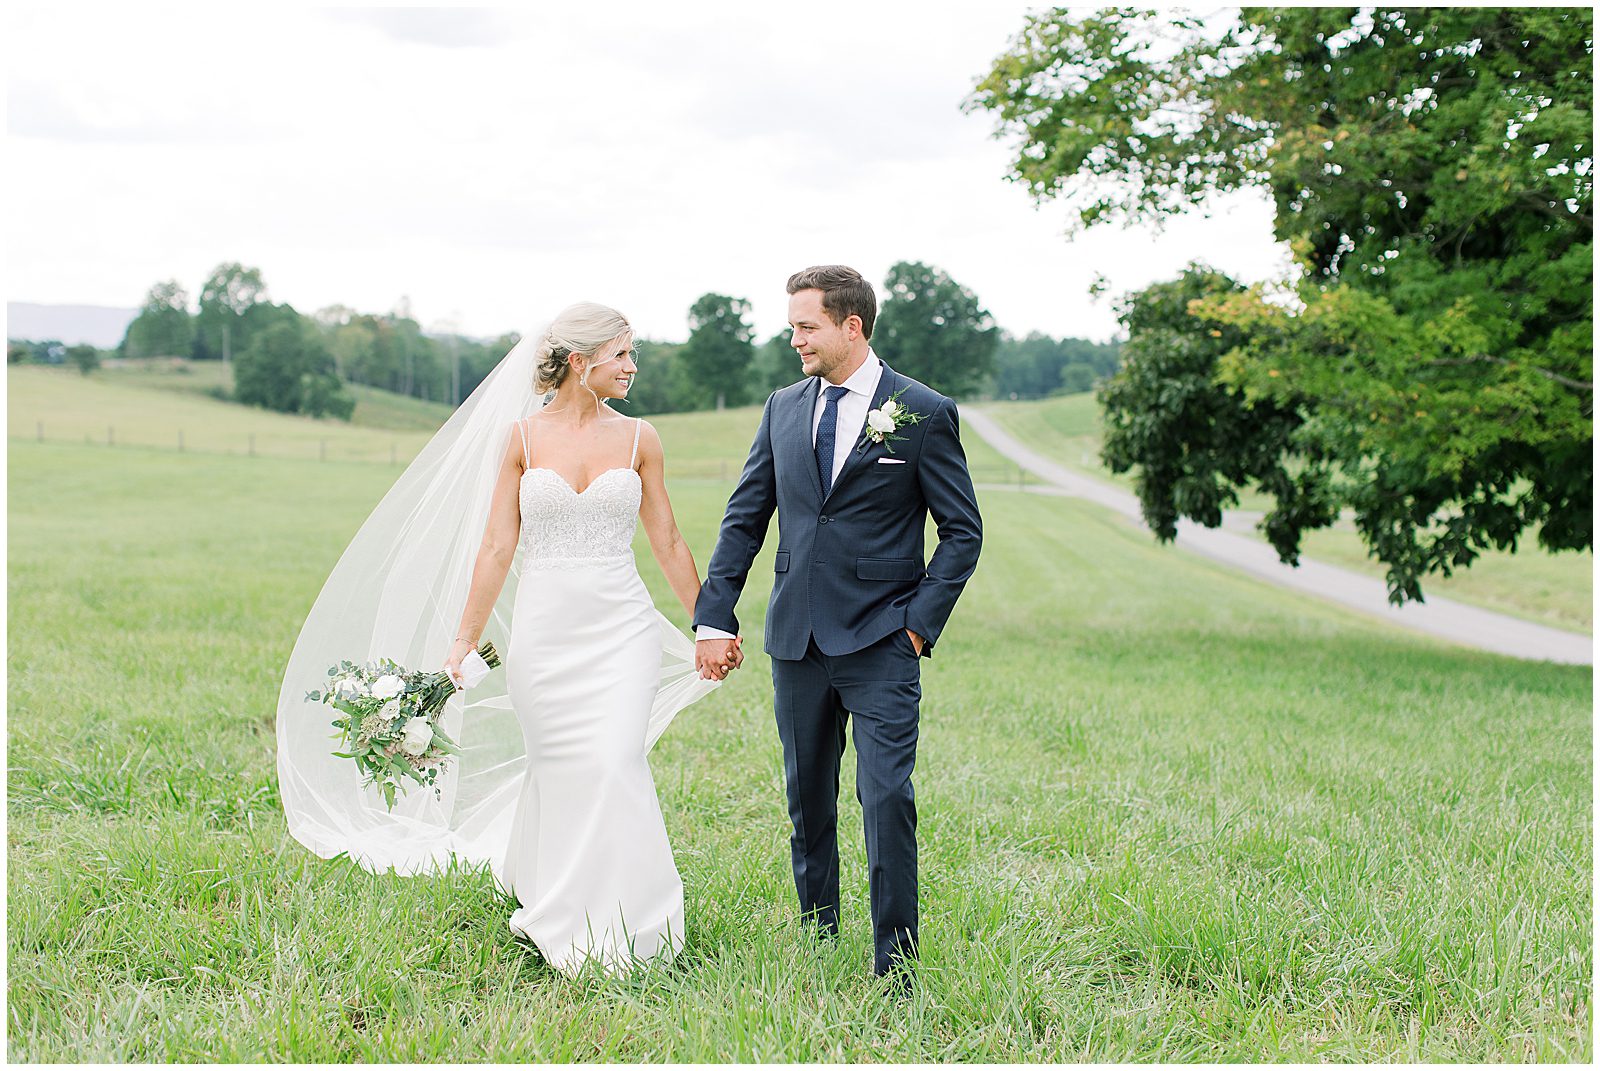 Bride and Groom Walking Through a Field Photo